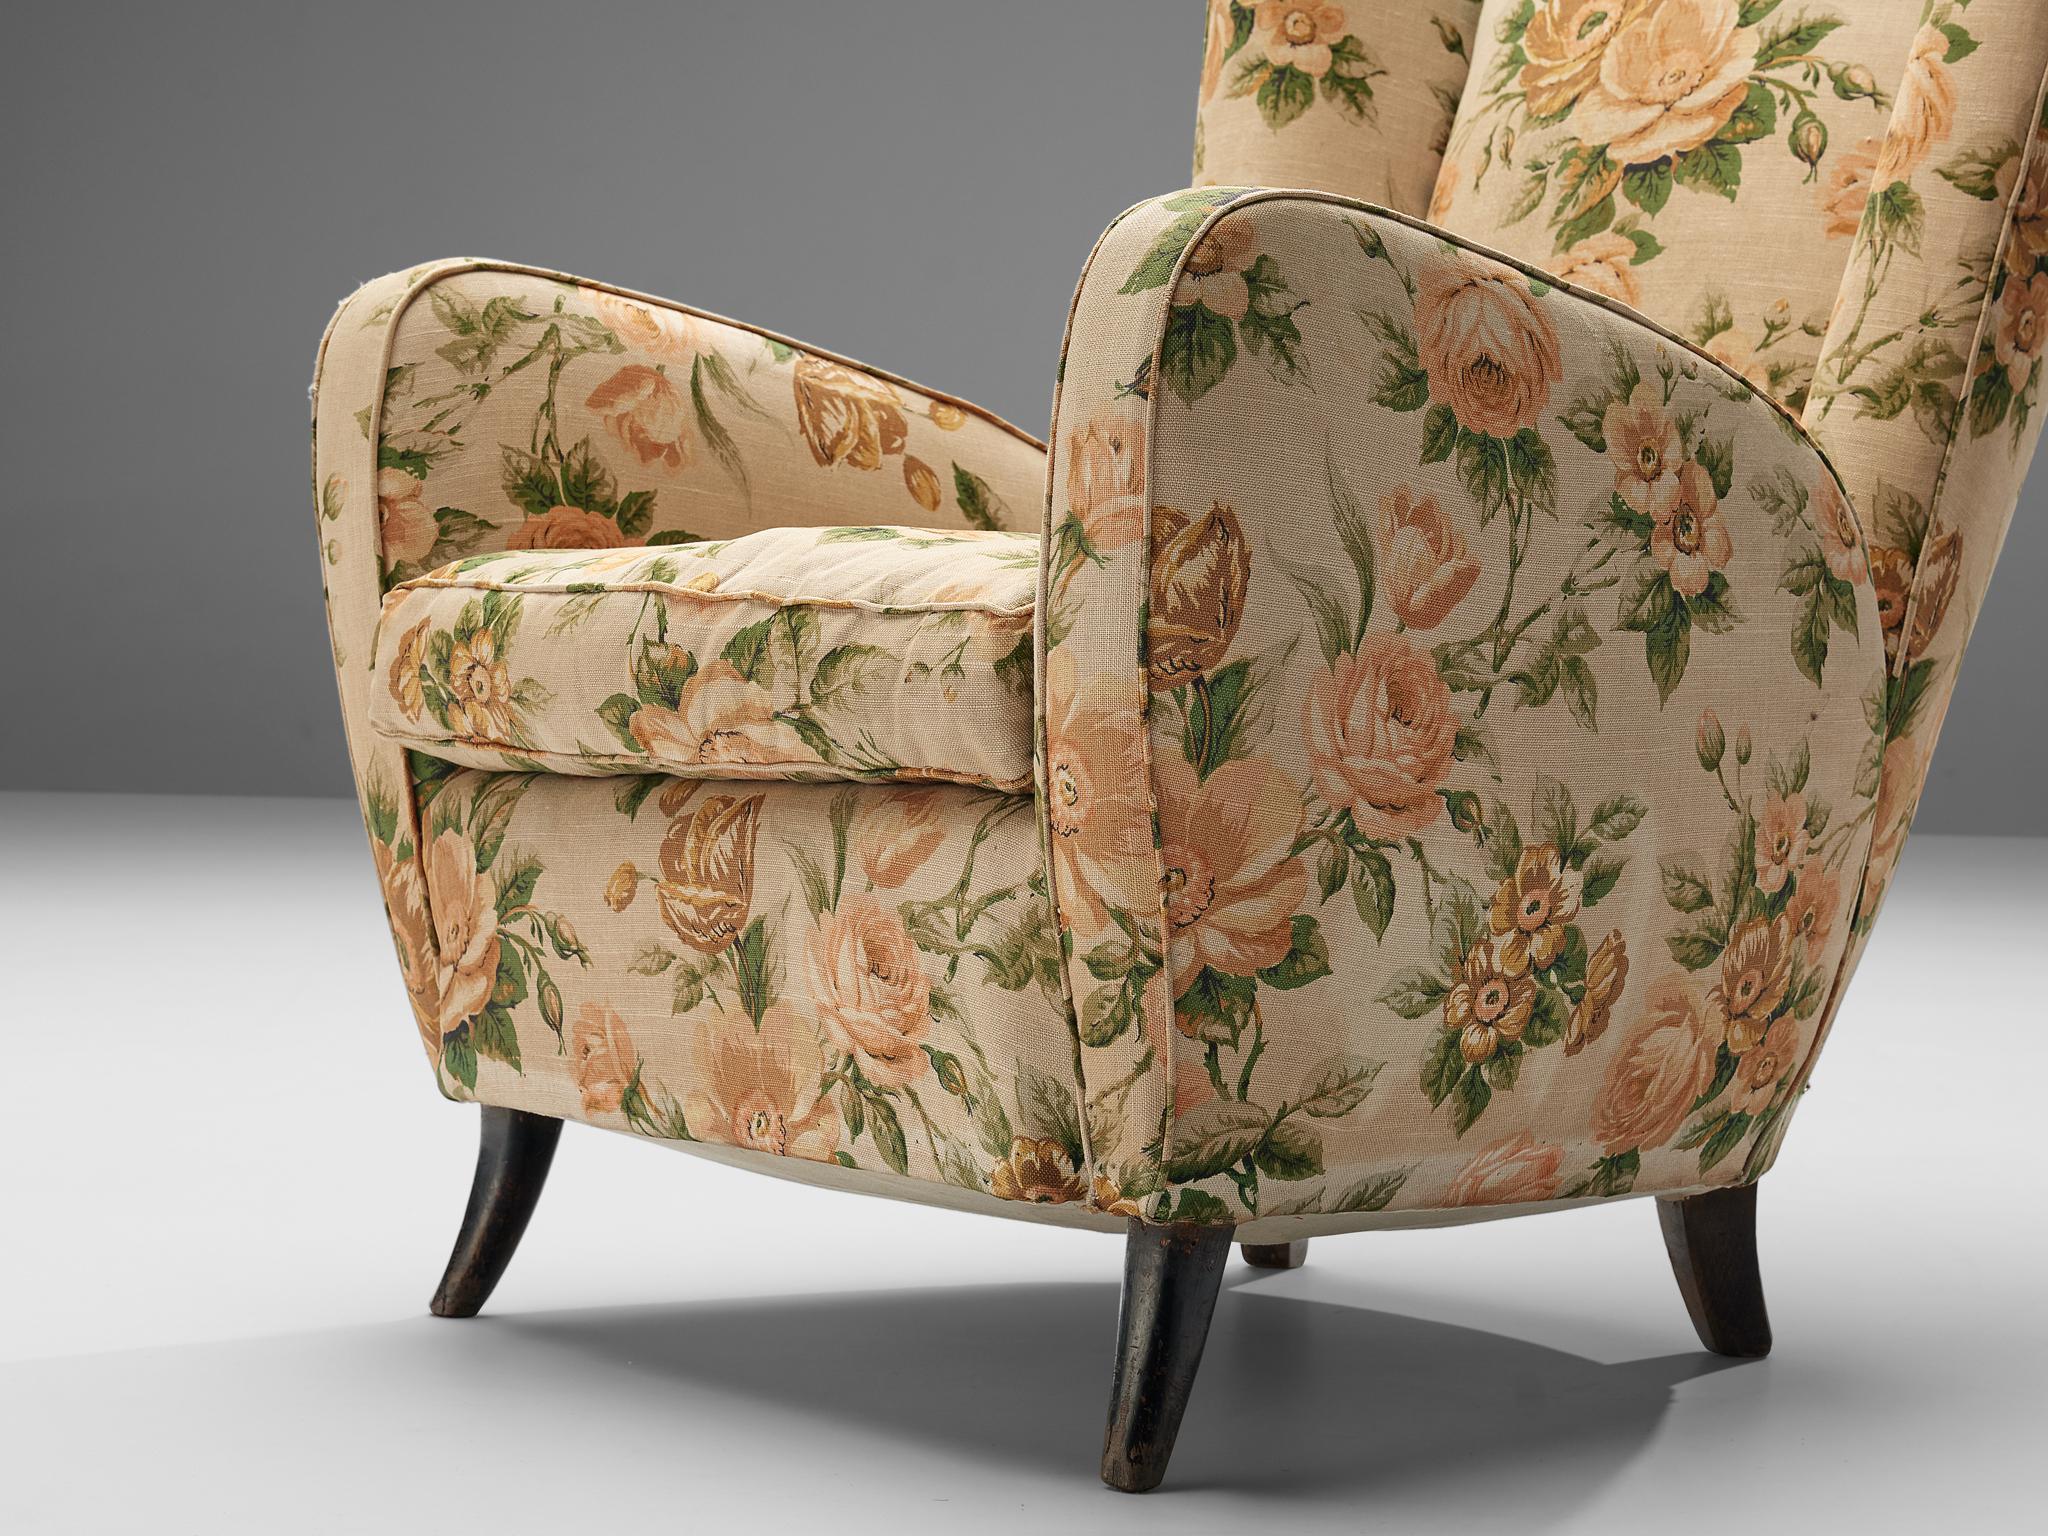 Mid-20th Century Pair of Italian Wingback Chairs in Floral Upholstery